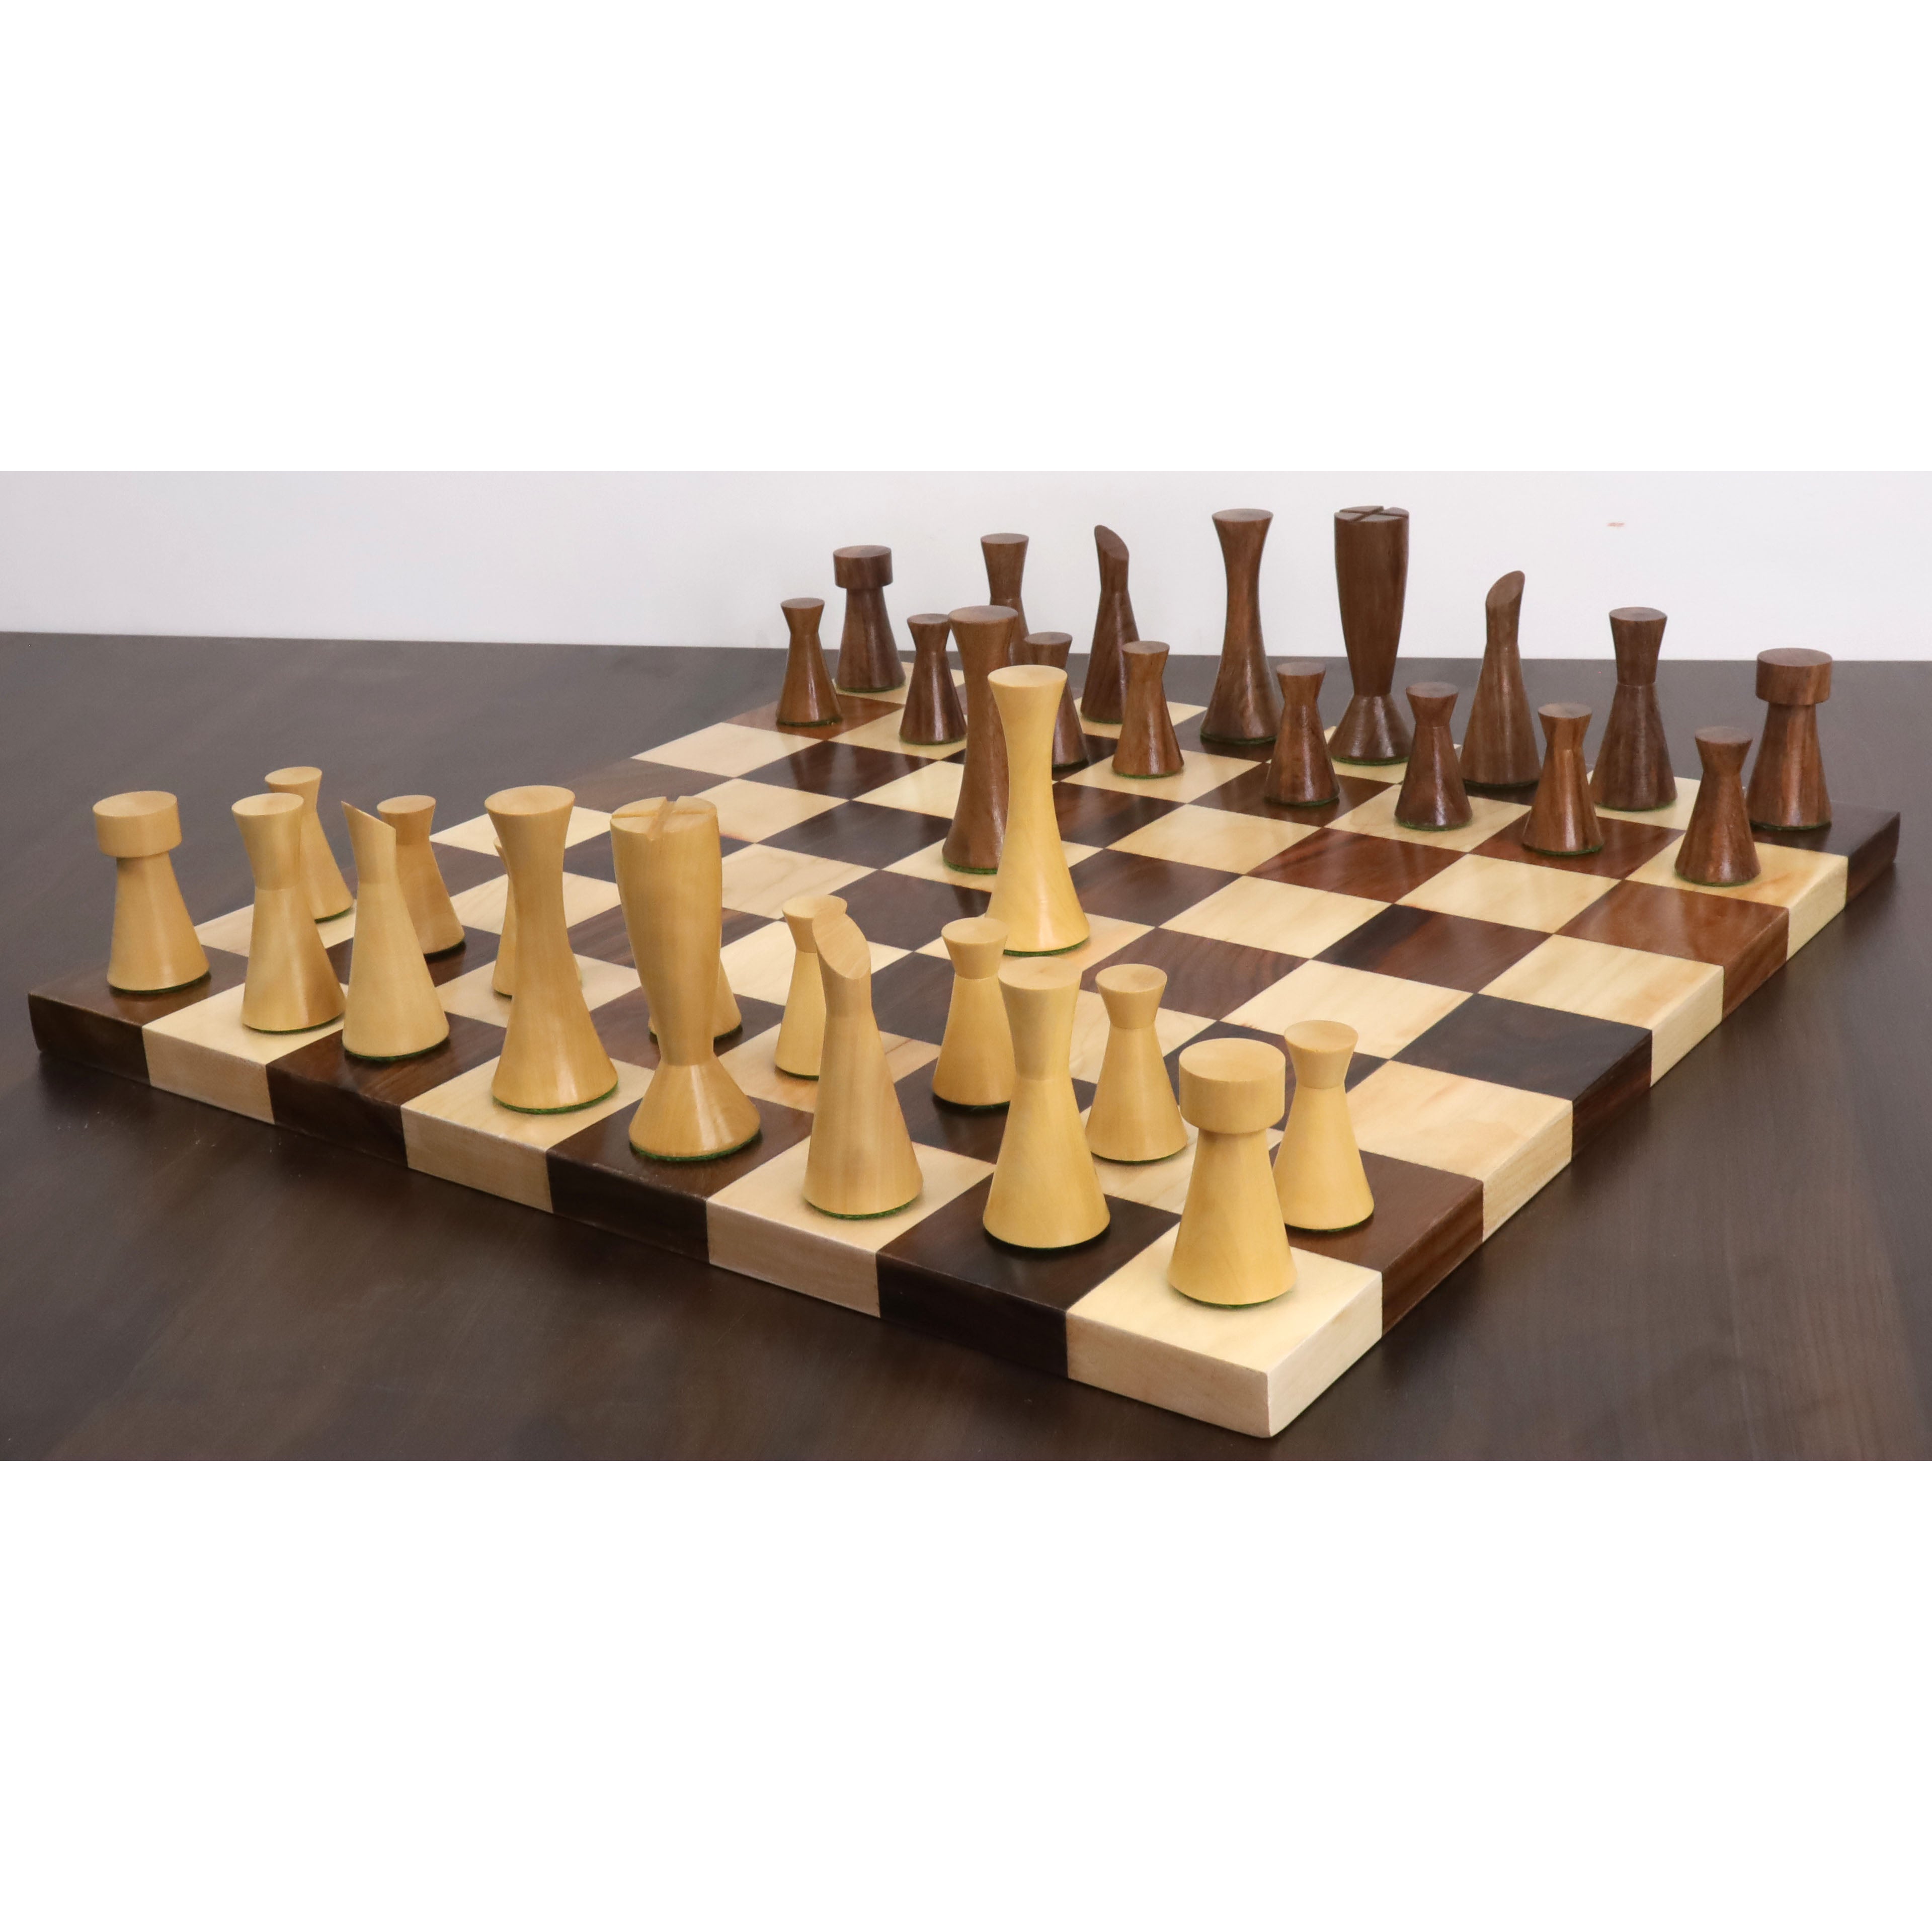 3.4" Minimalist Tower Series Chess Set- Chess Pieces Only- Weighted Golden Rosewood